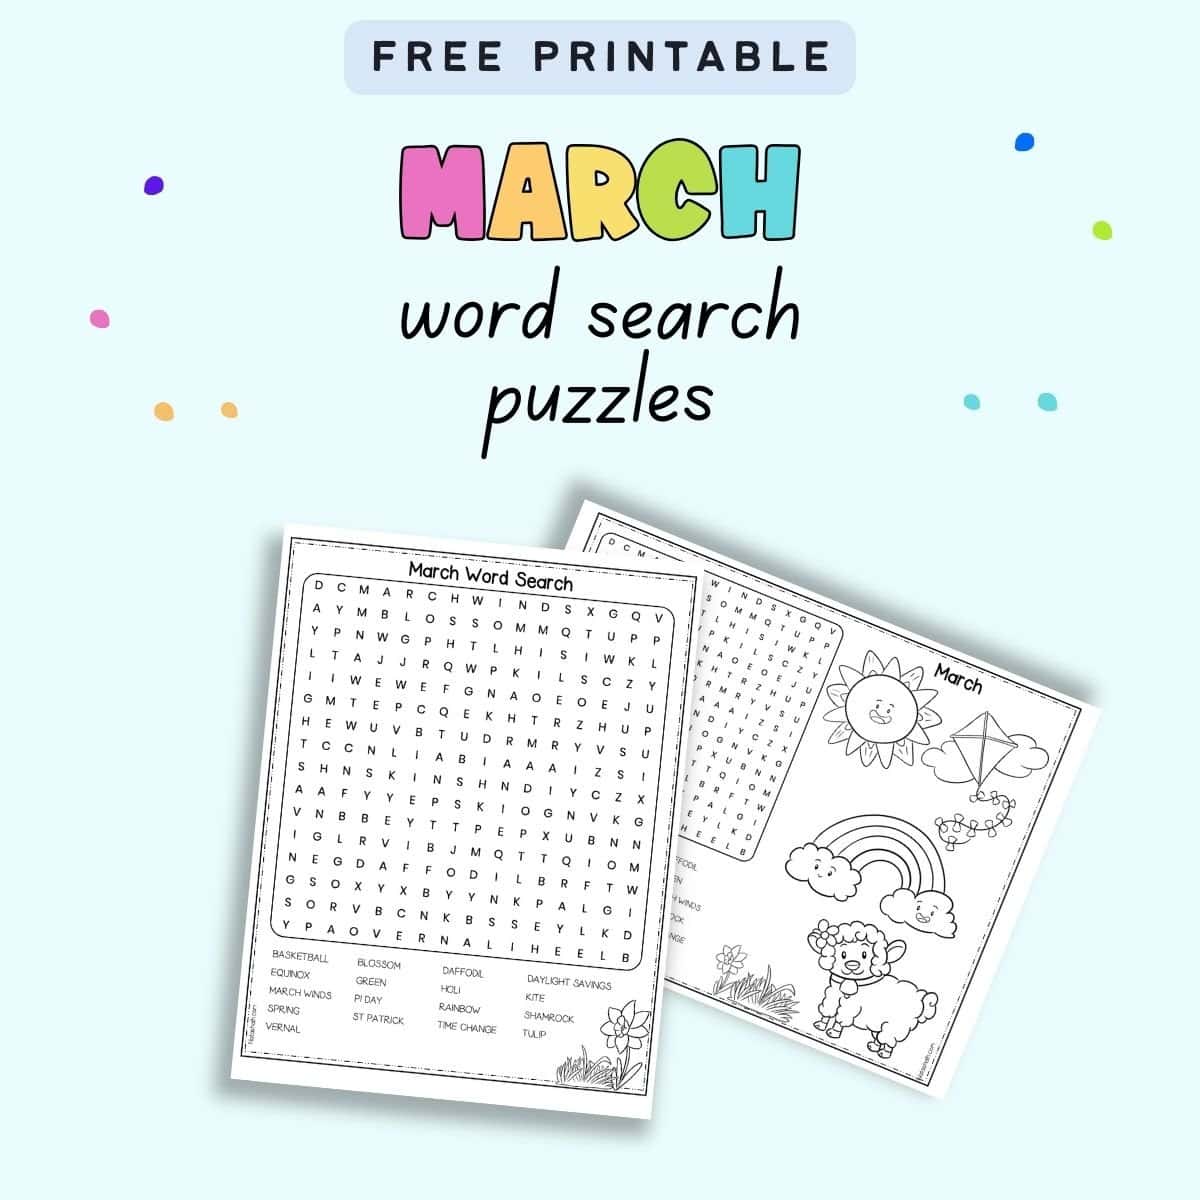 Text "free printable March word search puzzles" with a preview of two word search puzzles for March. One is in landscape orientation and the other in portrait.